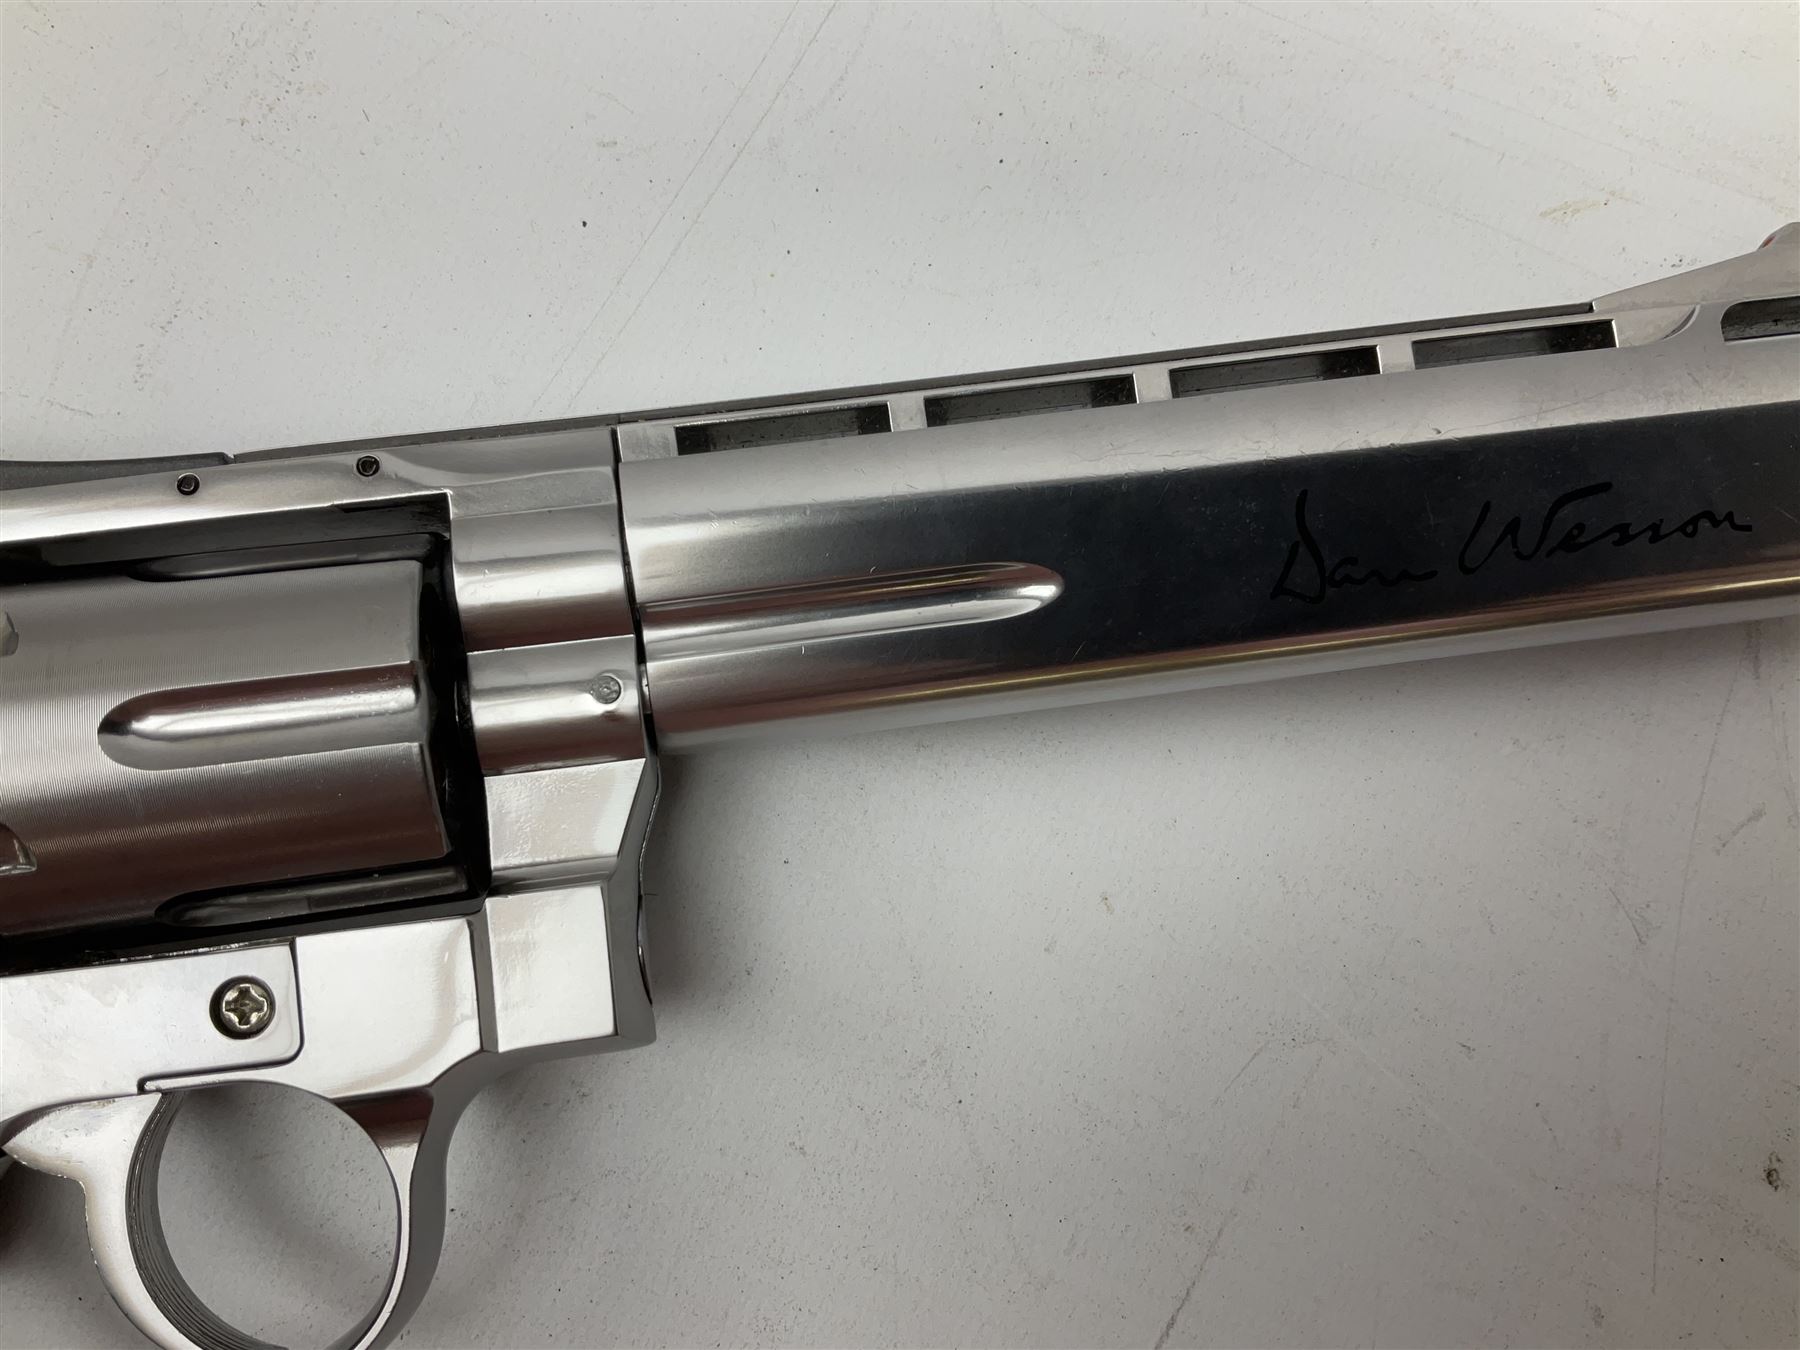 Dan Wesson CO2 .177 six-shot air pistol with highly polished finish - Image 4 of 15